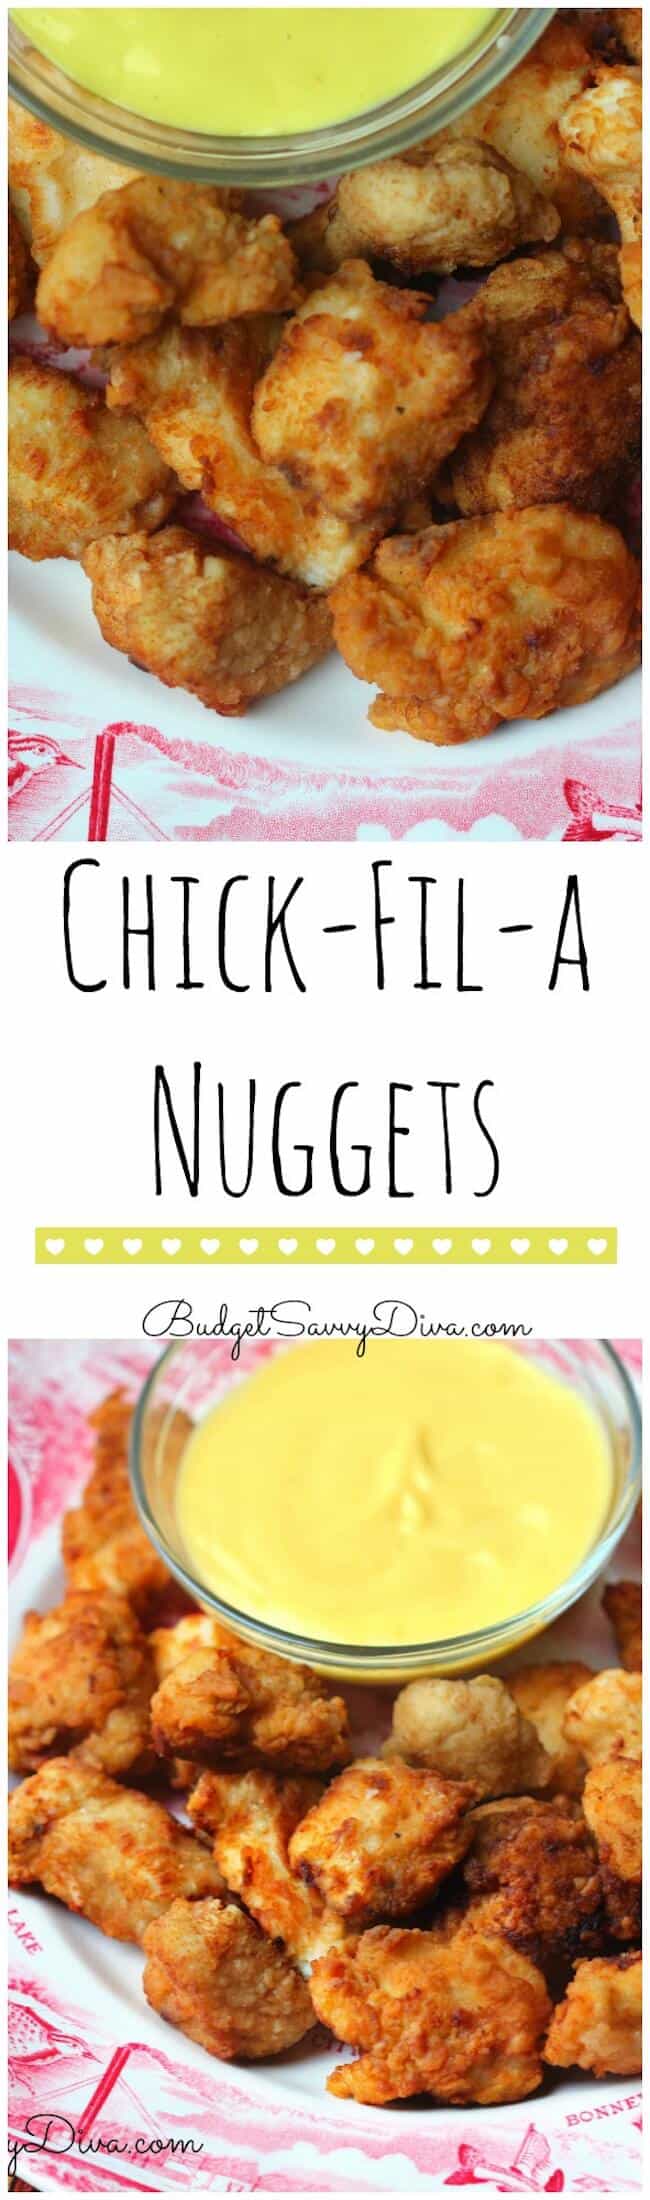 Copy Cat Chick Fil A Nuggets from Budget Savvy Diva